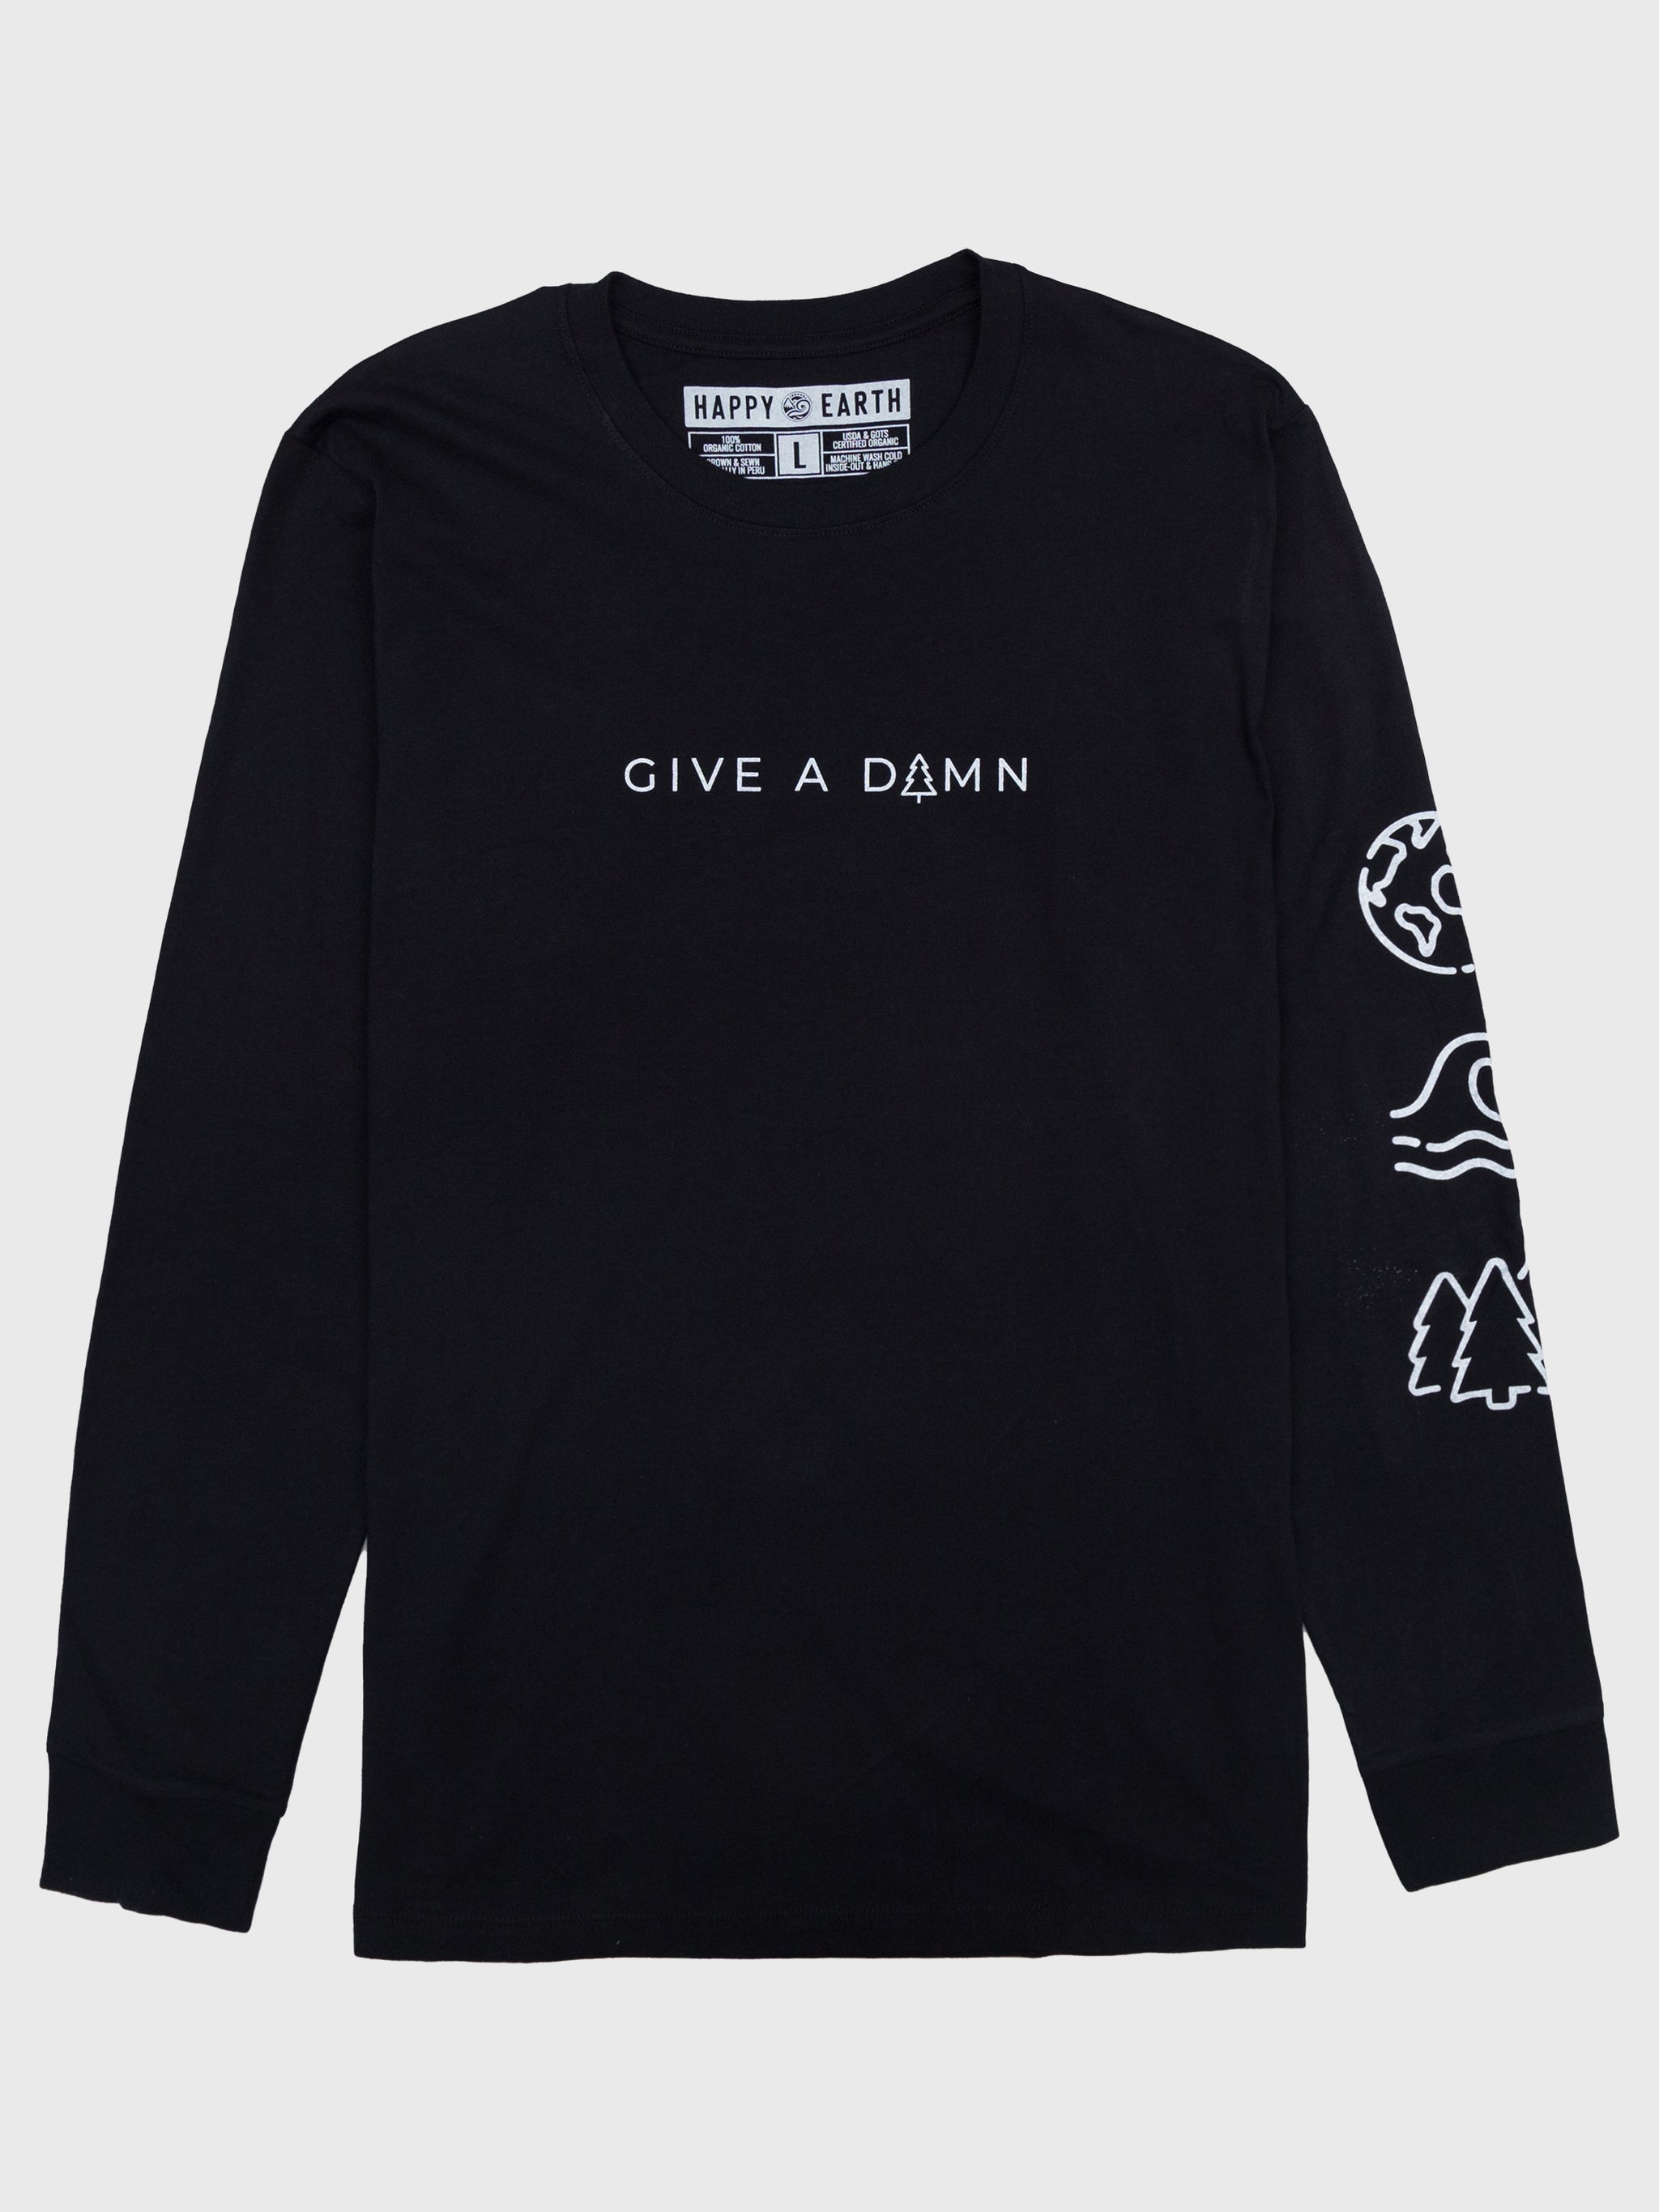 All-gender Give a Damn Elements Organic Cotton Long Sleeve Tee - Black